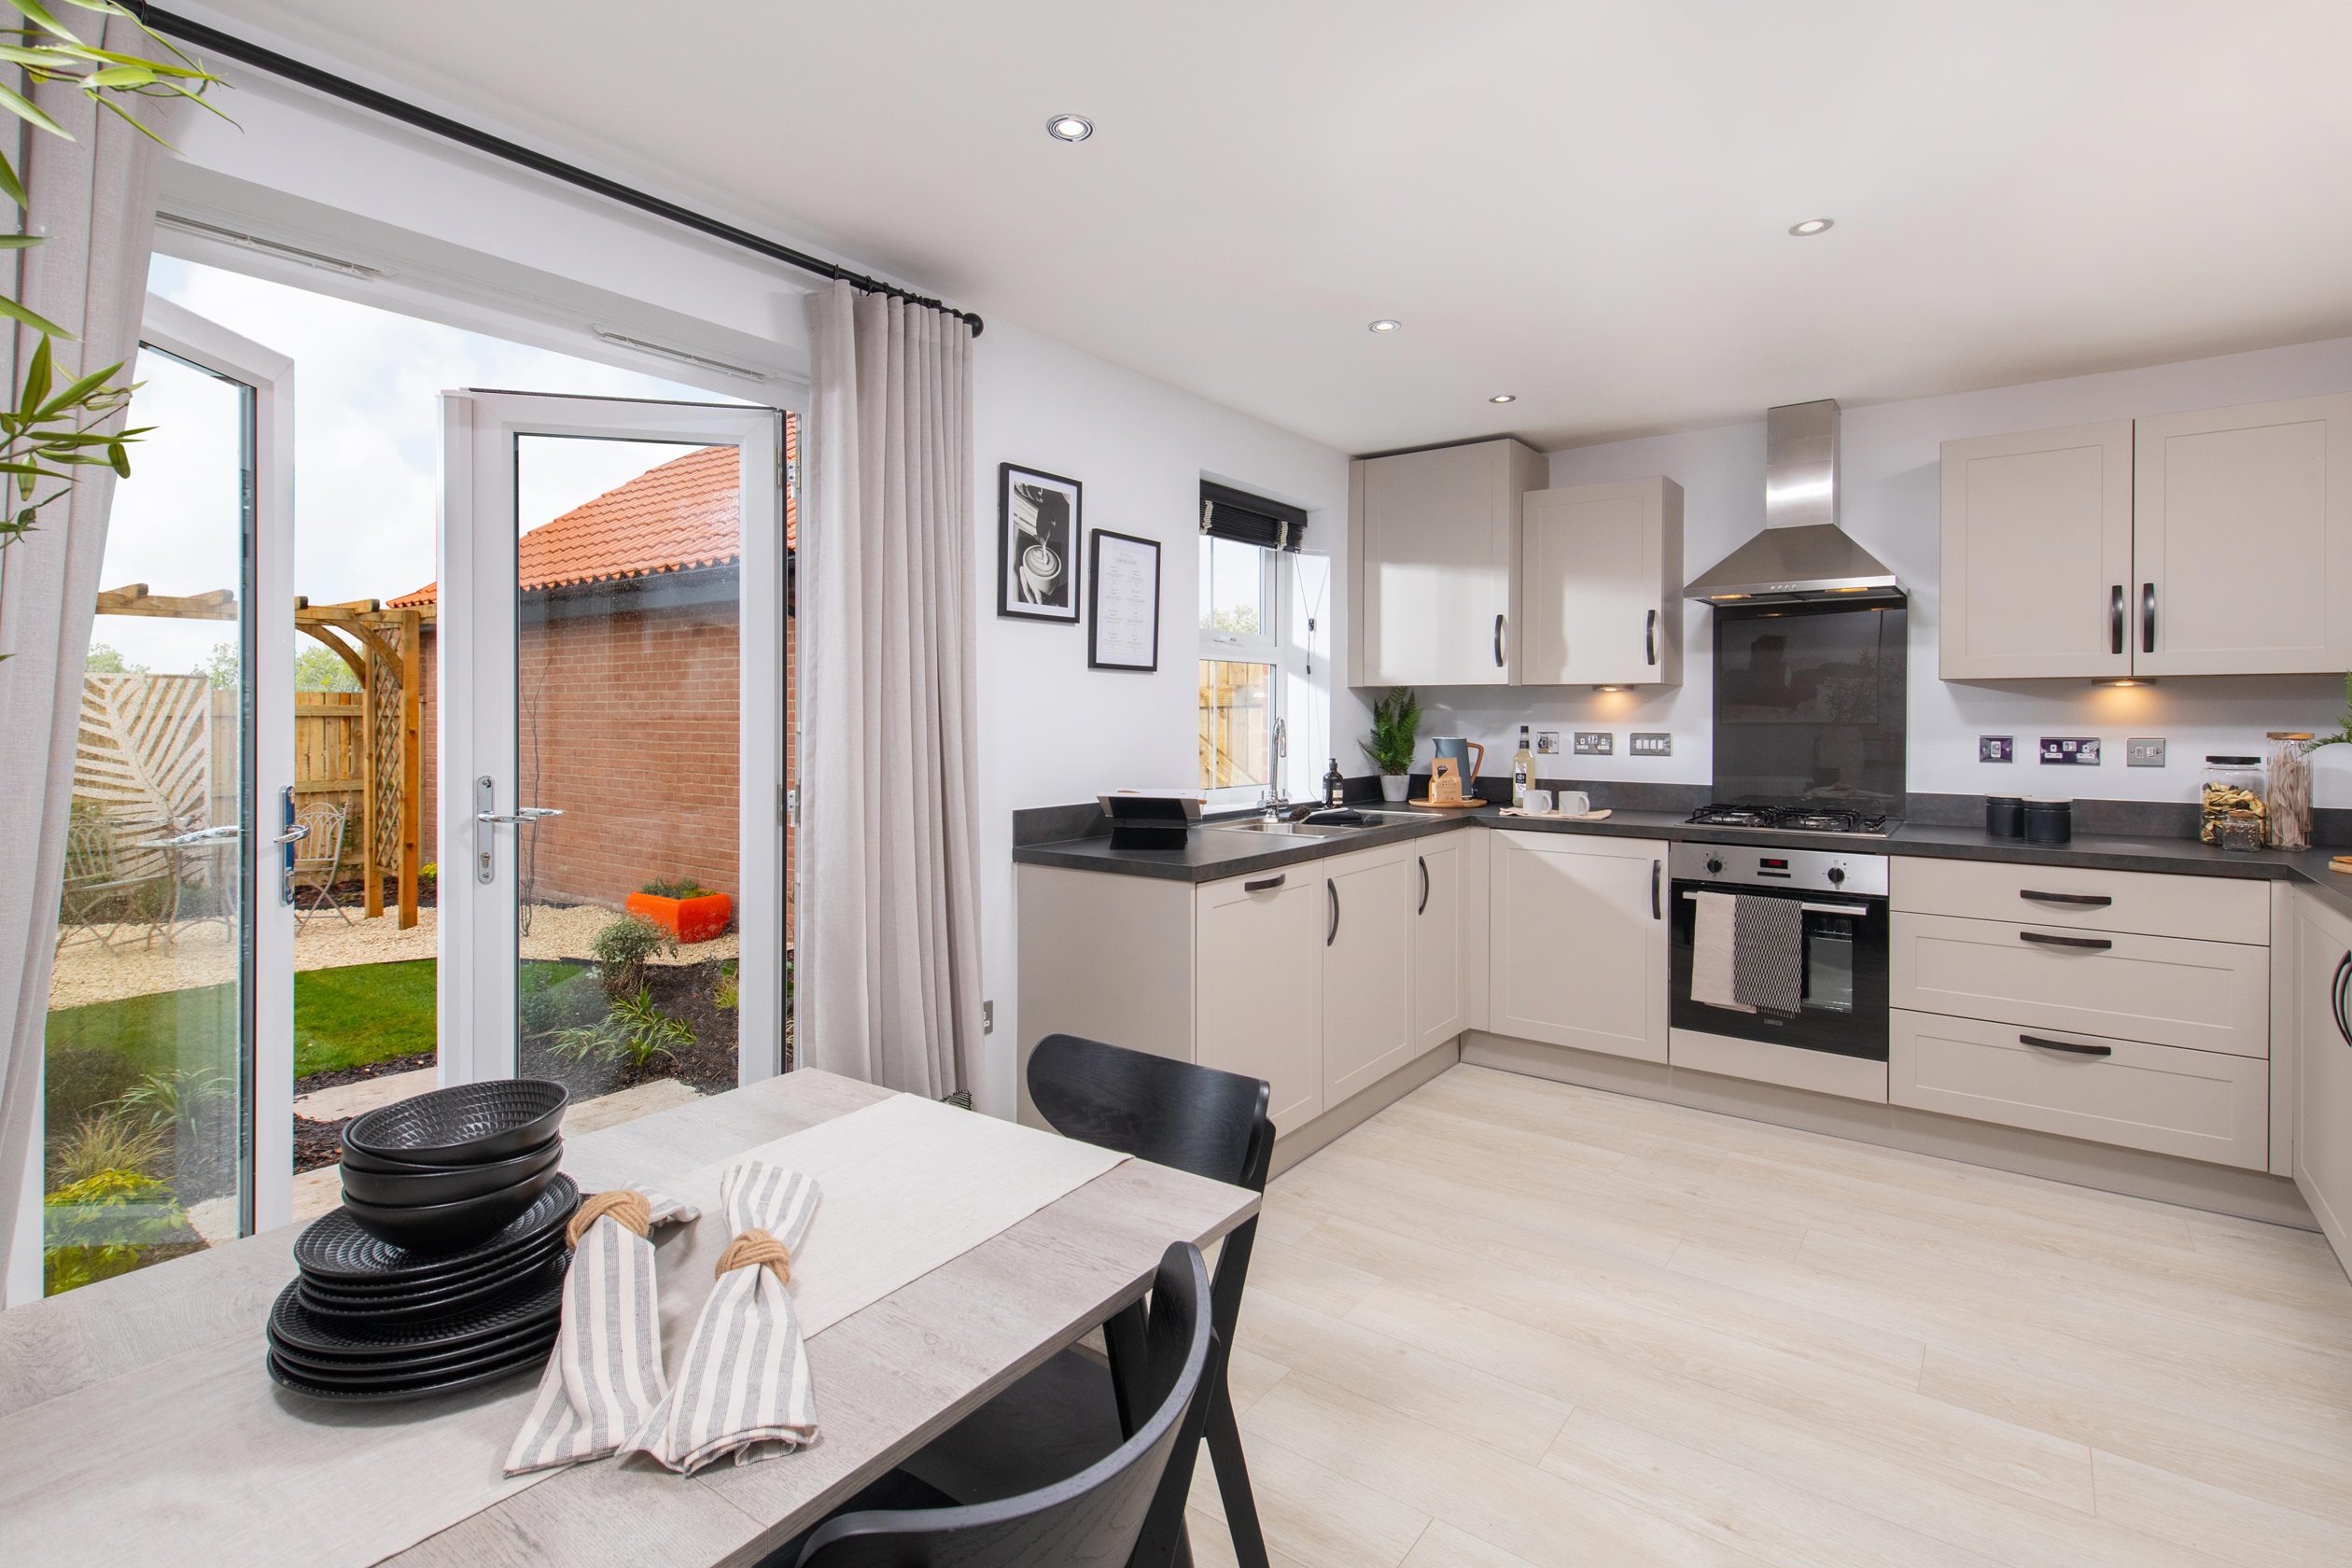 Property 2 of 9. The Archford Show Home